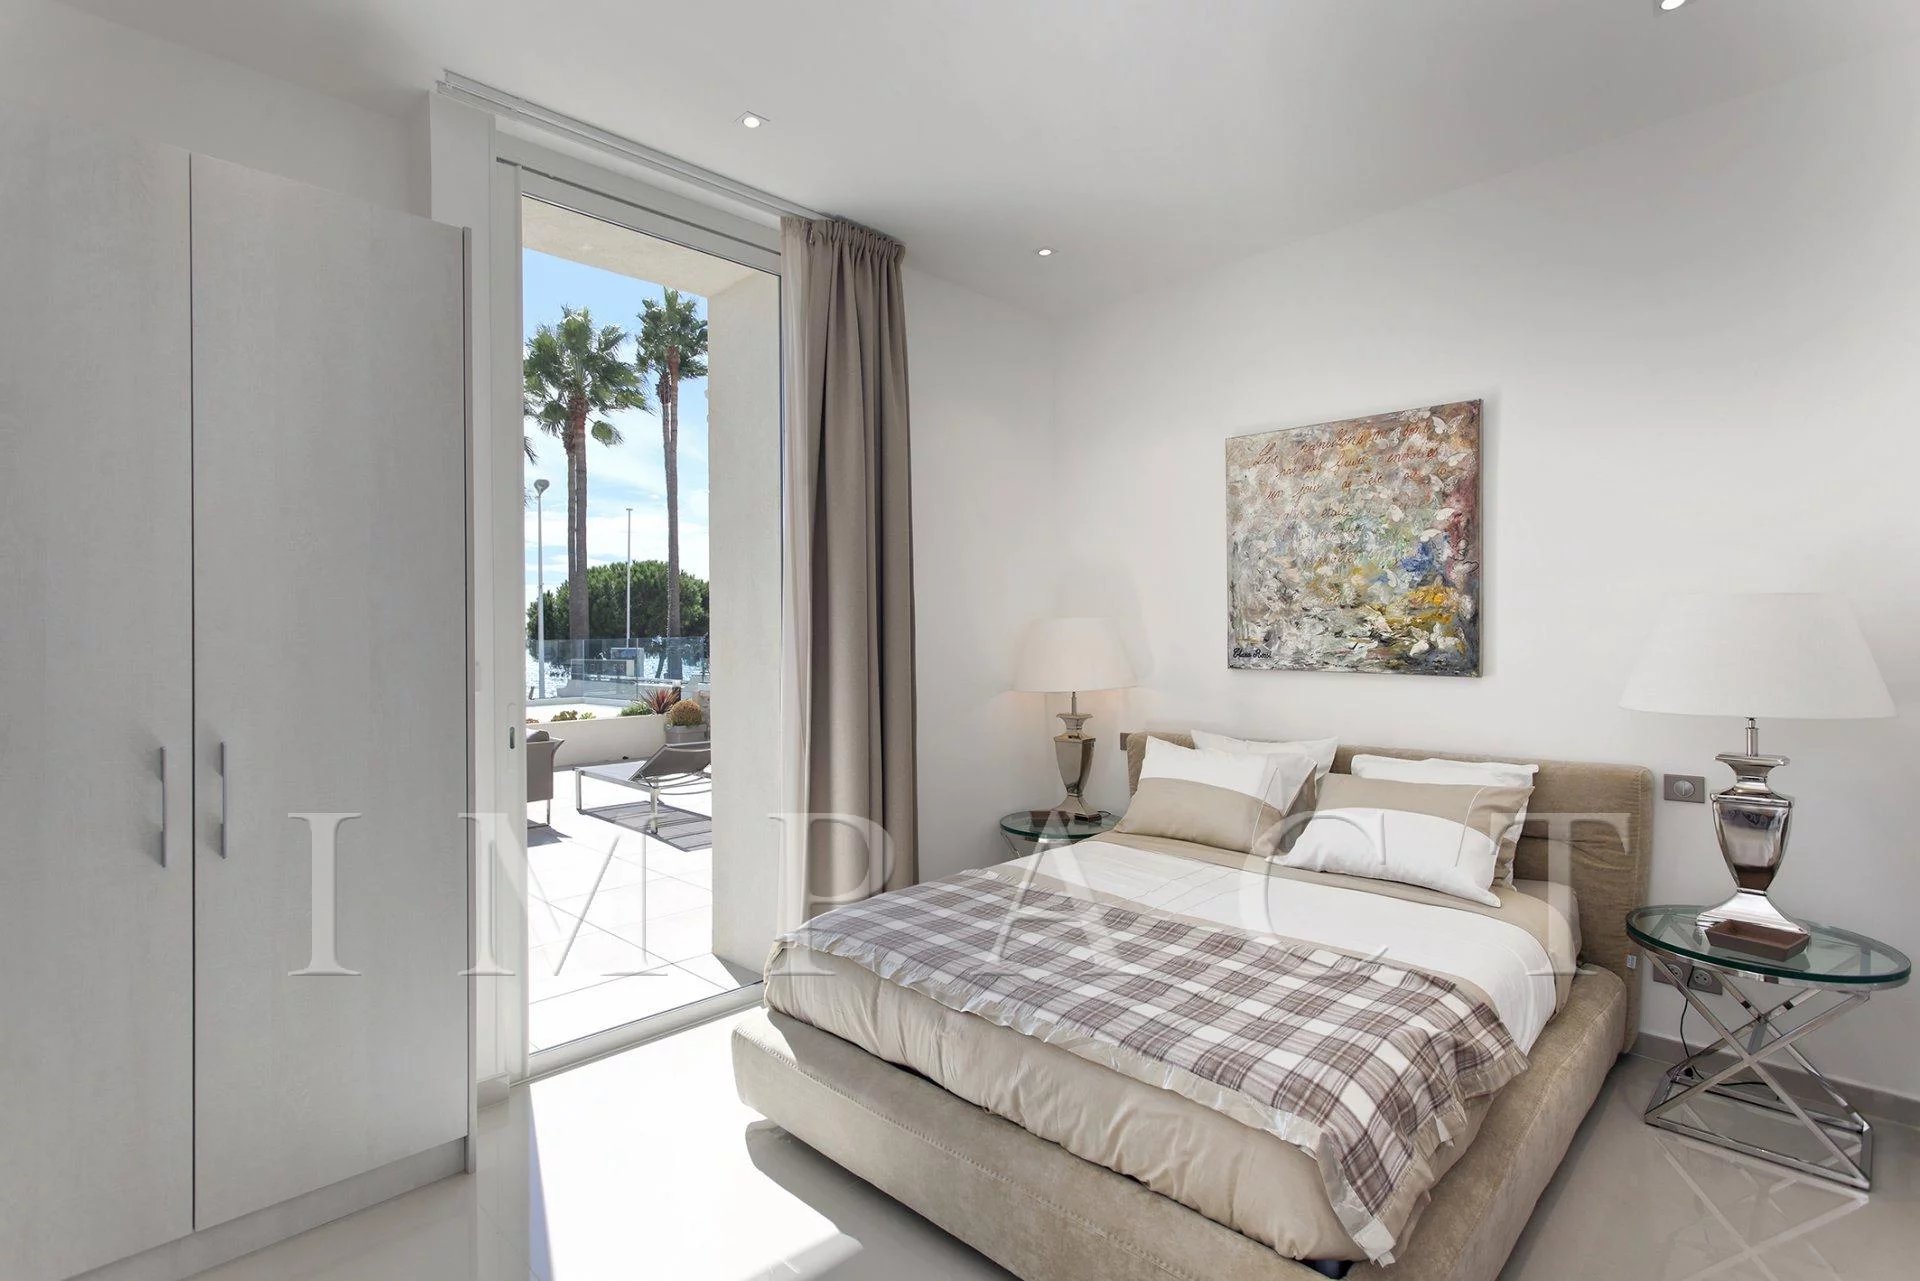 3 bedrooms apartment to rent, Cannes center